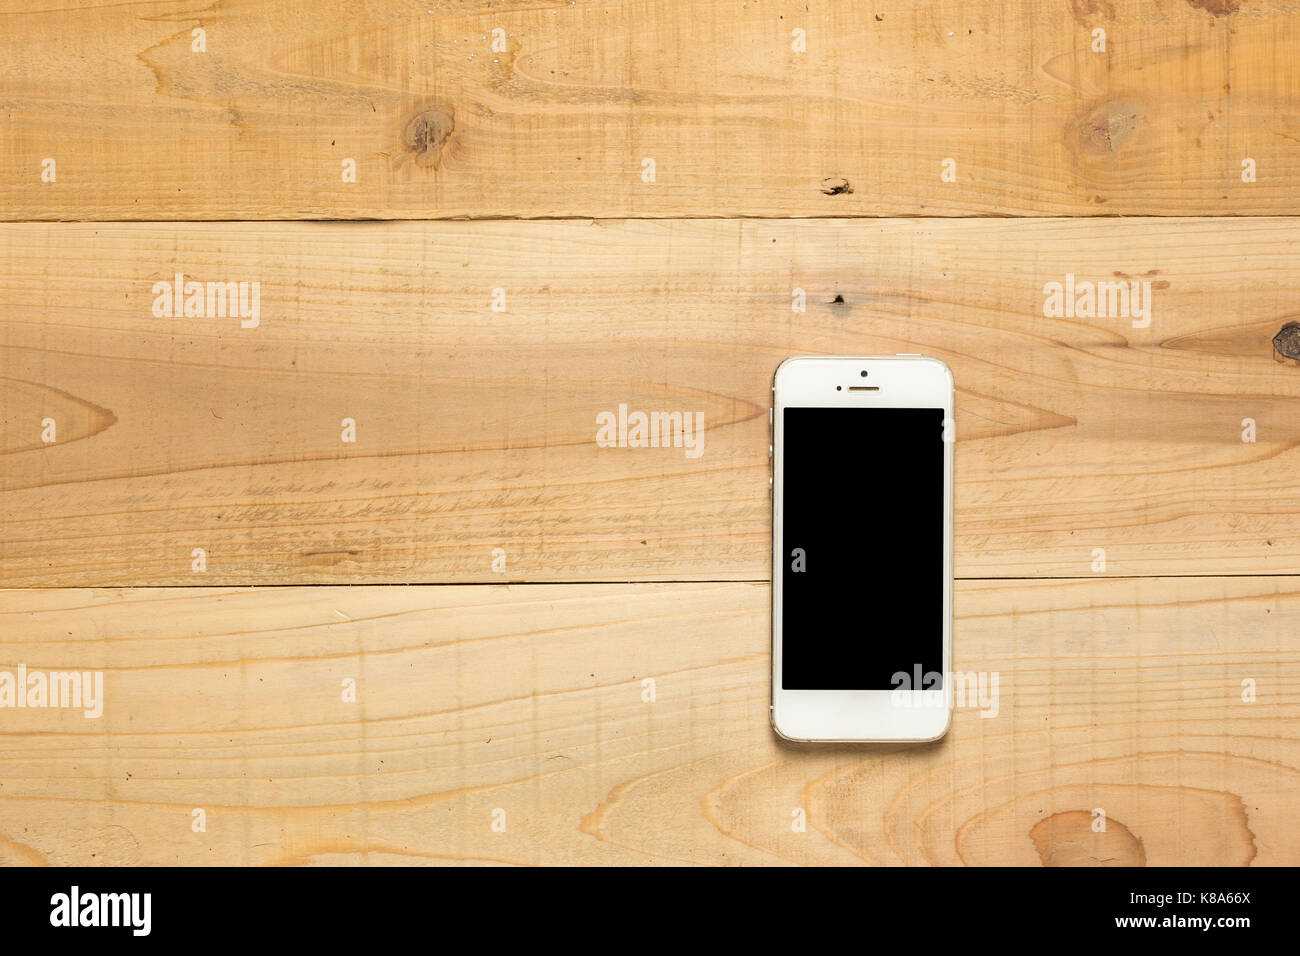 Smartphone on wooden table Stock Photo